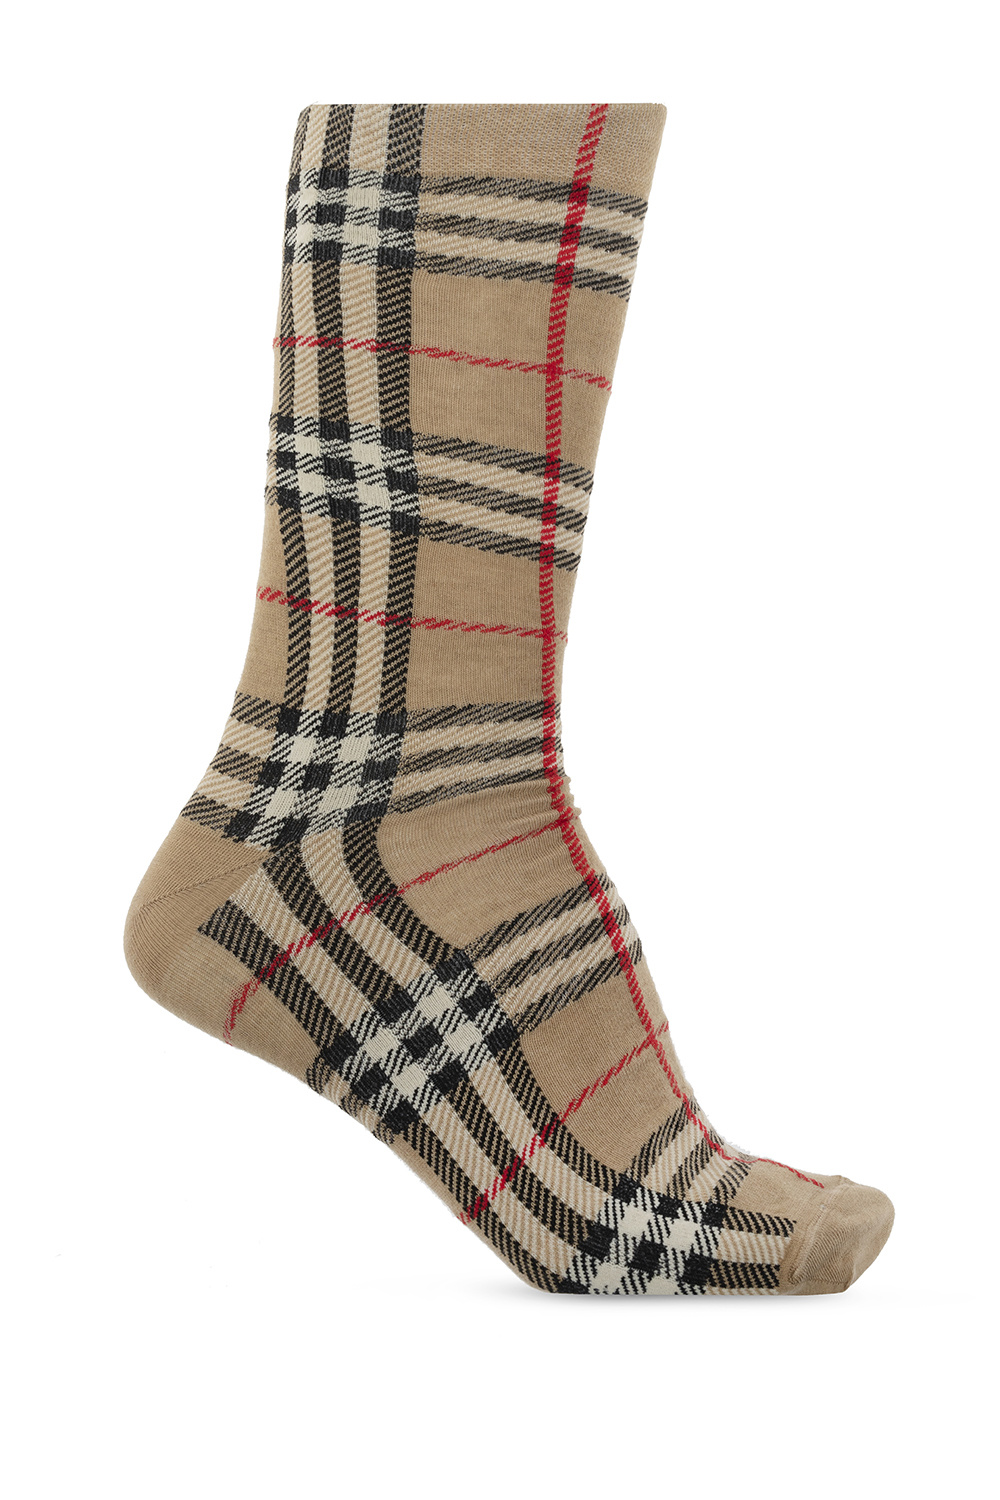 IetpShops Norway - Burberry knitted sub high-top sneakers - Socks with  'Vintage' check Burberry